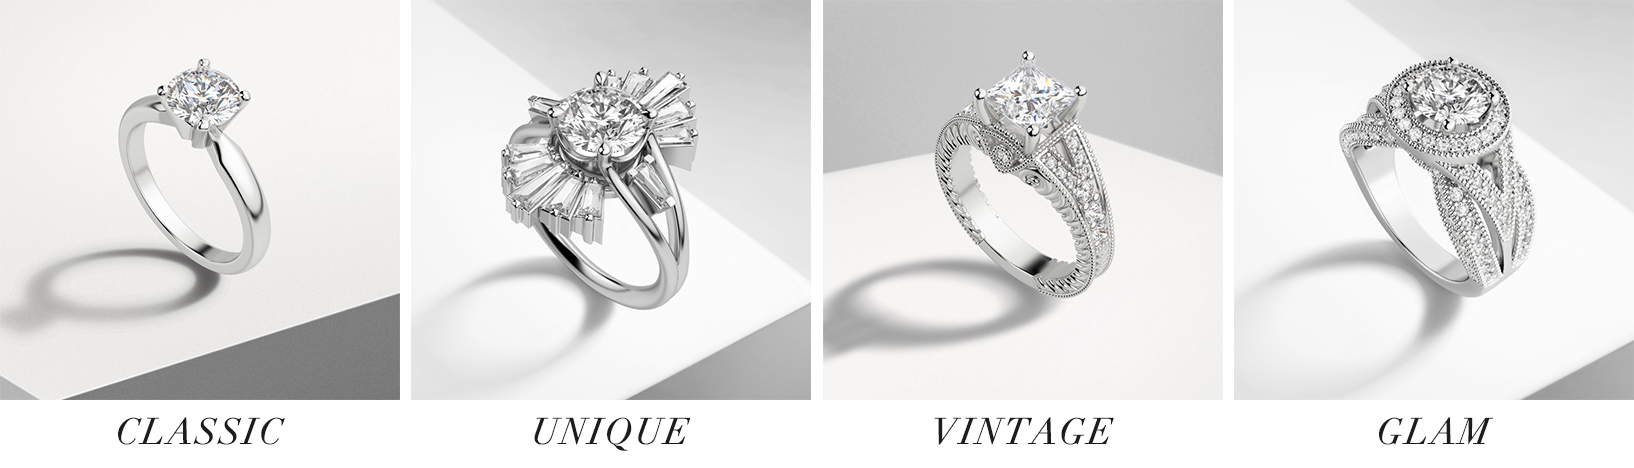 Classic, unique, vintage and glam style simulated diamond engagement rings.